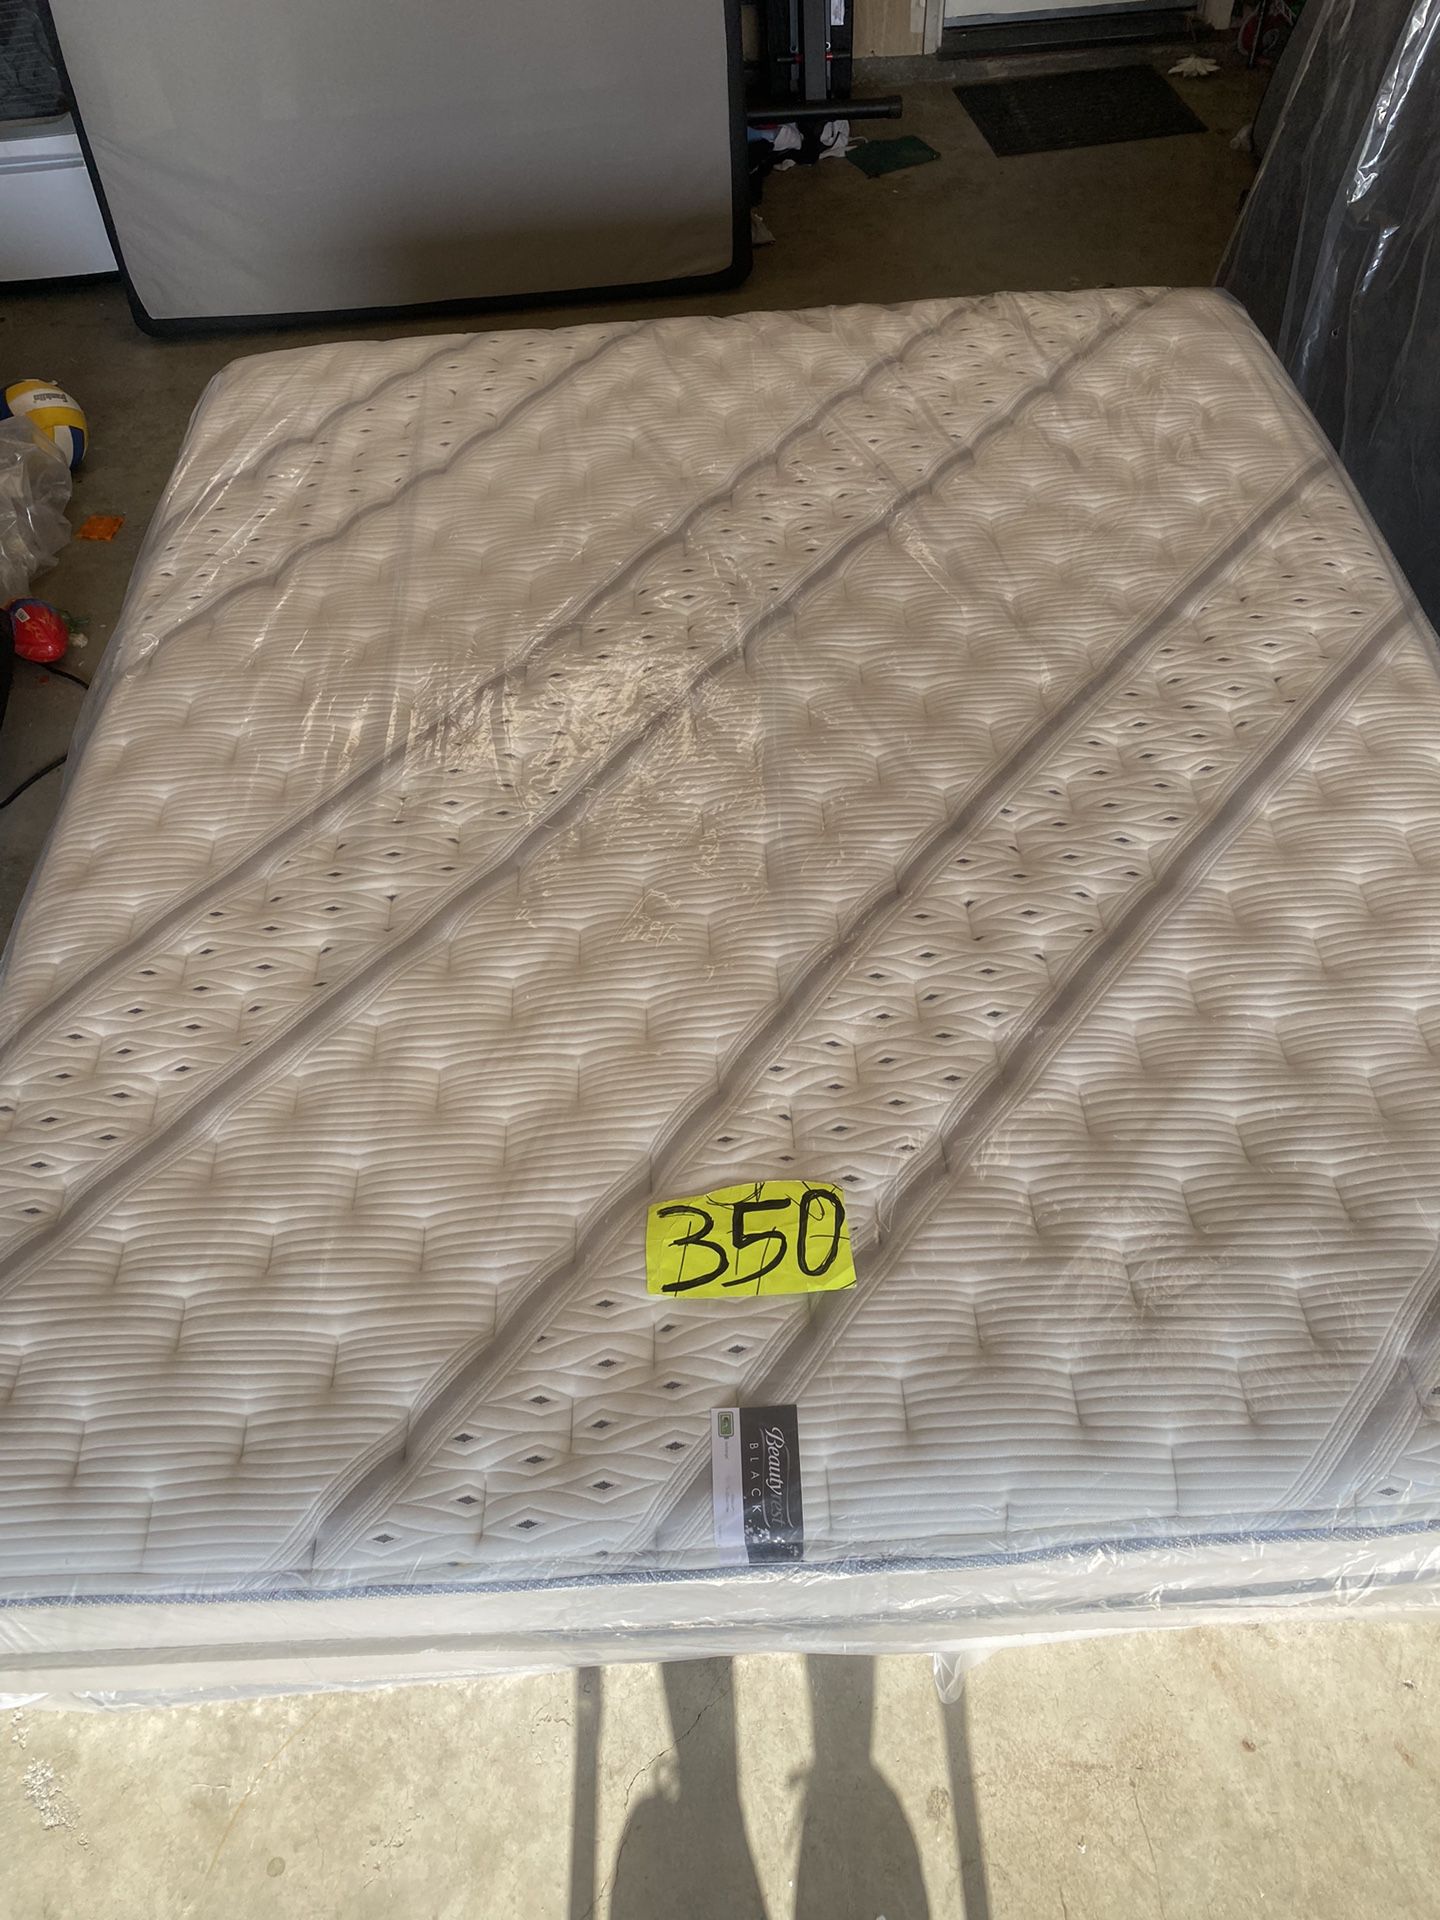 California King Mattress, And Boxspring, Simmons Beauty Rest